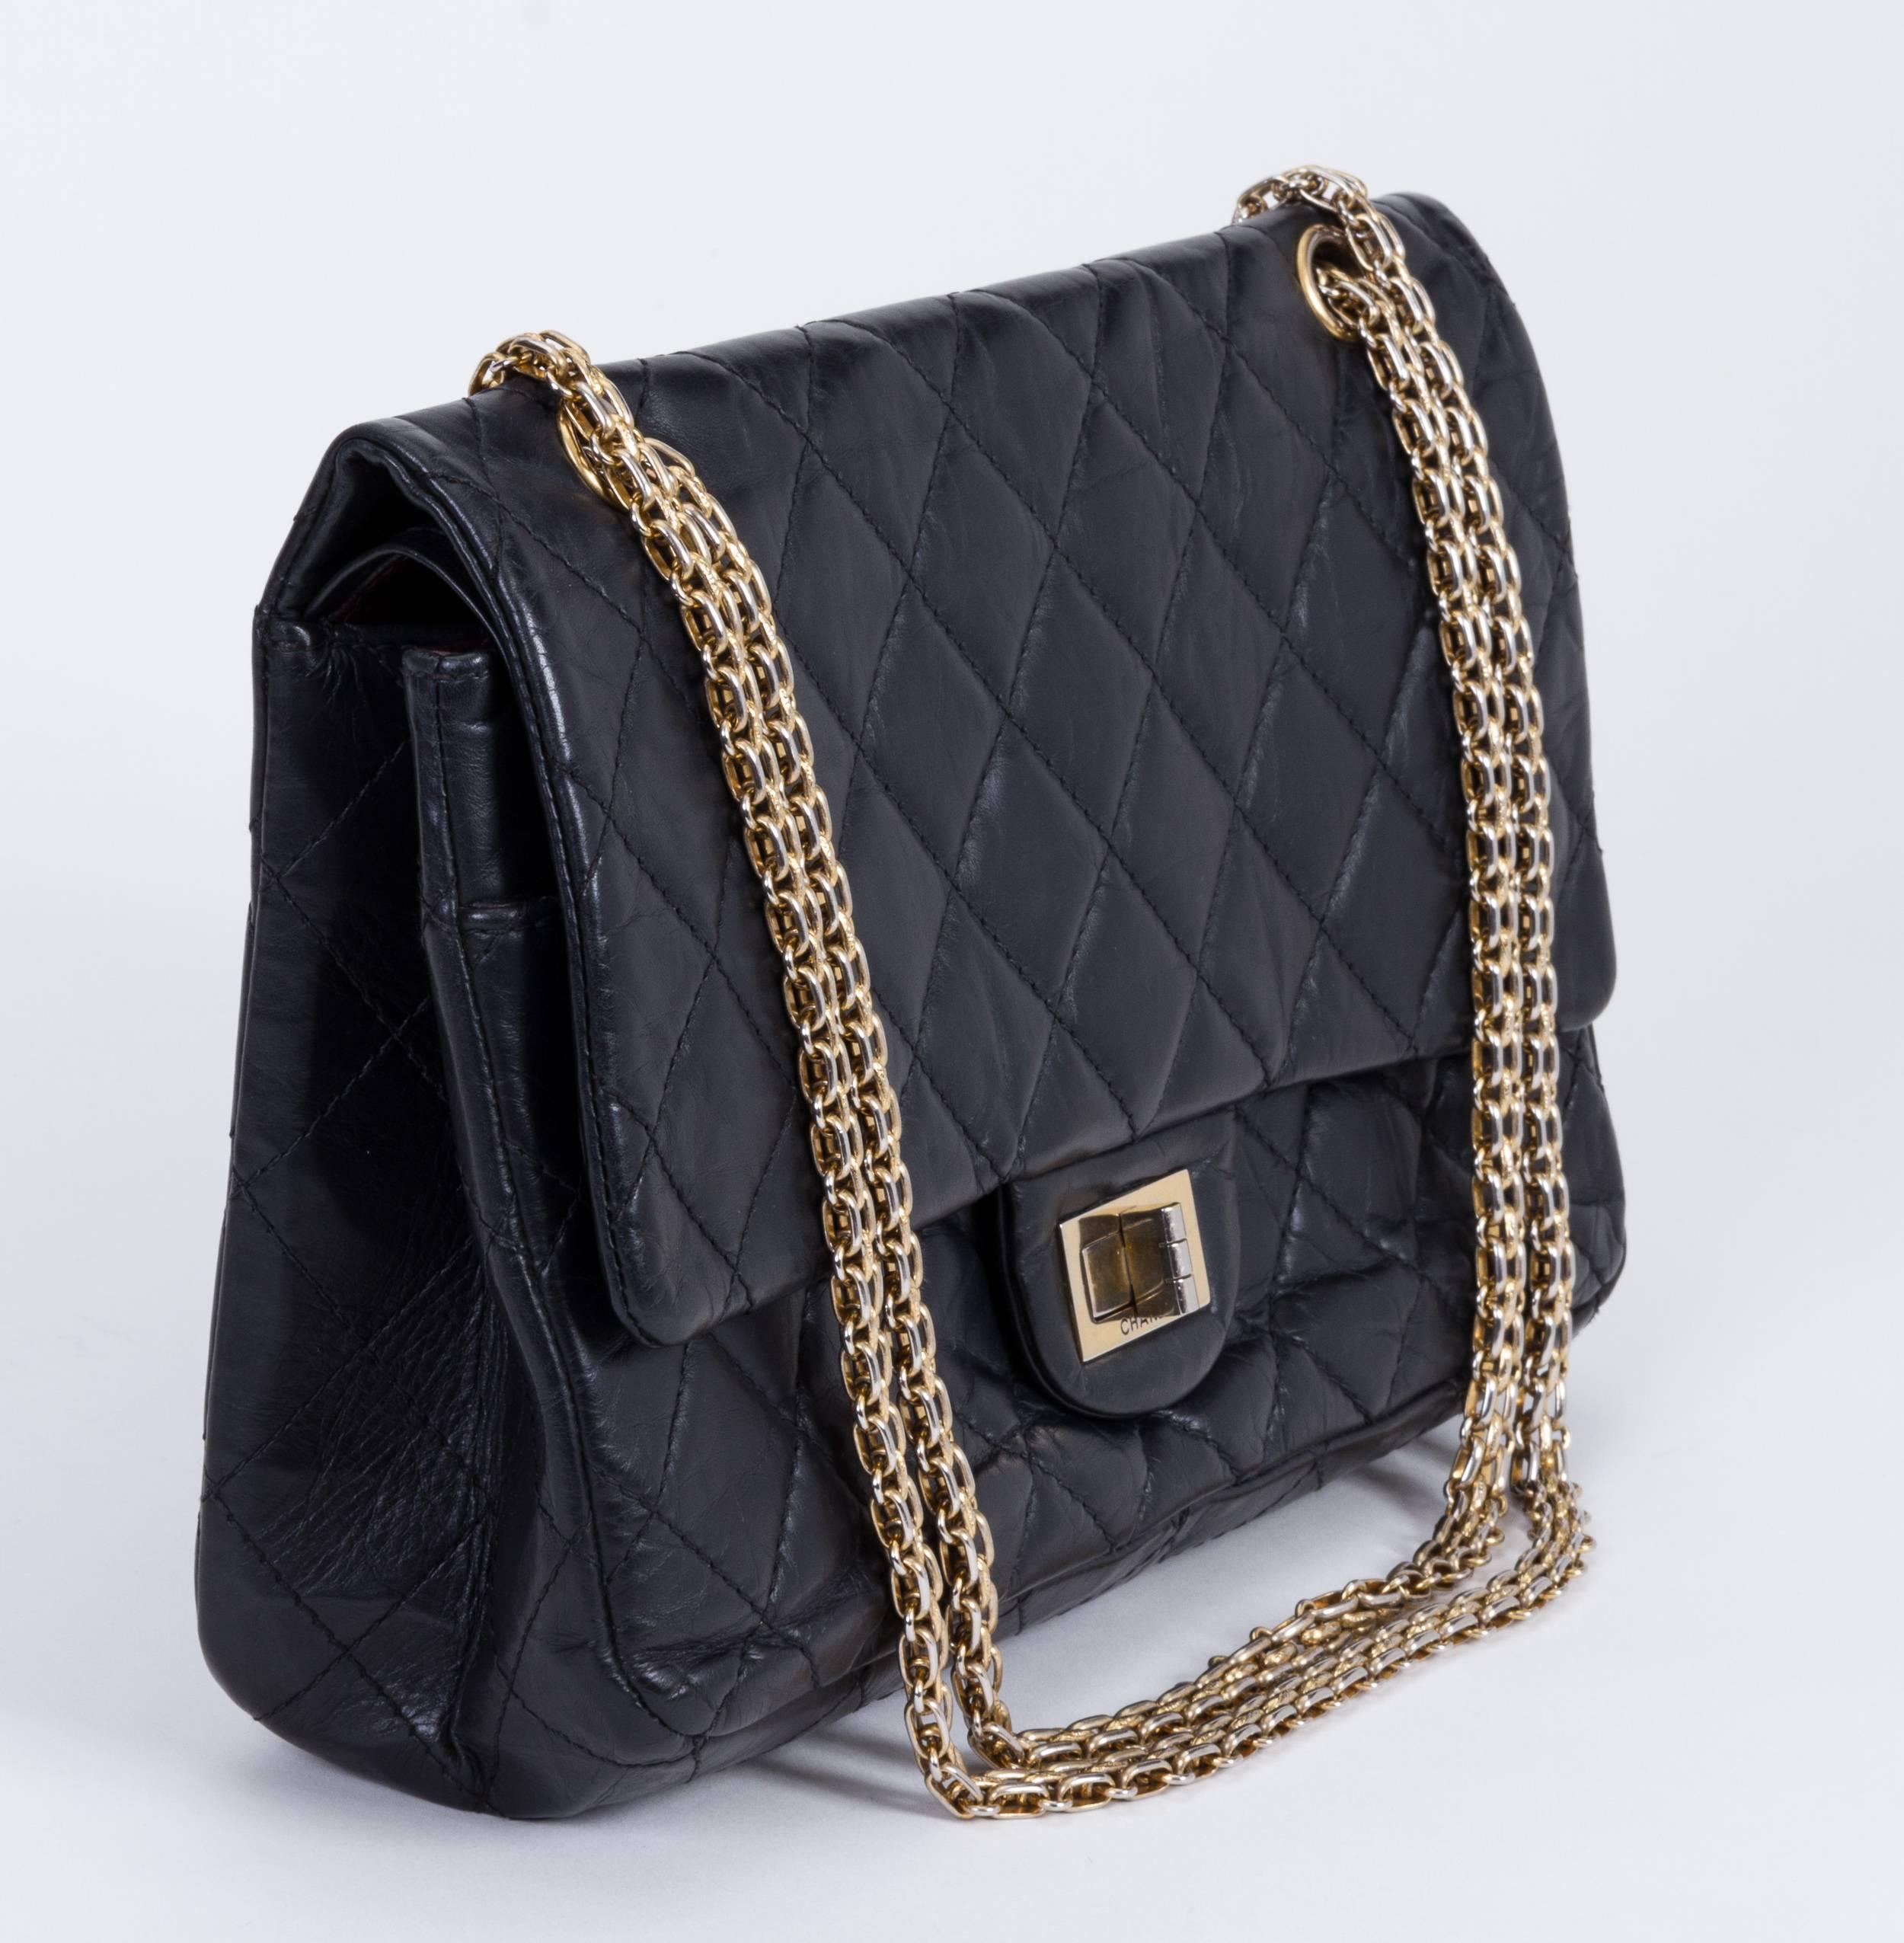 Chanel jumbo reissue double-flap bag. Black distressed leather and gold tone hardware metal. Can be worn cross body. Shoulder drop: 11